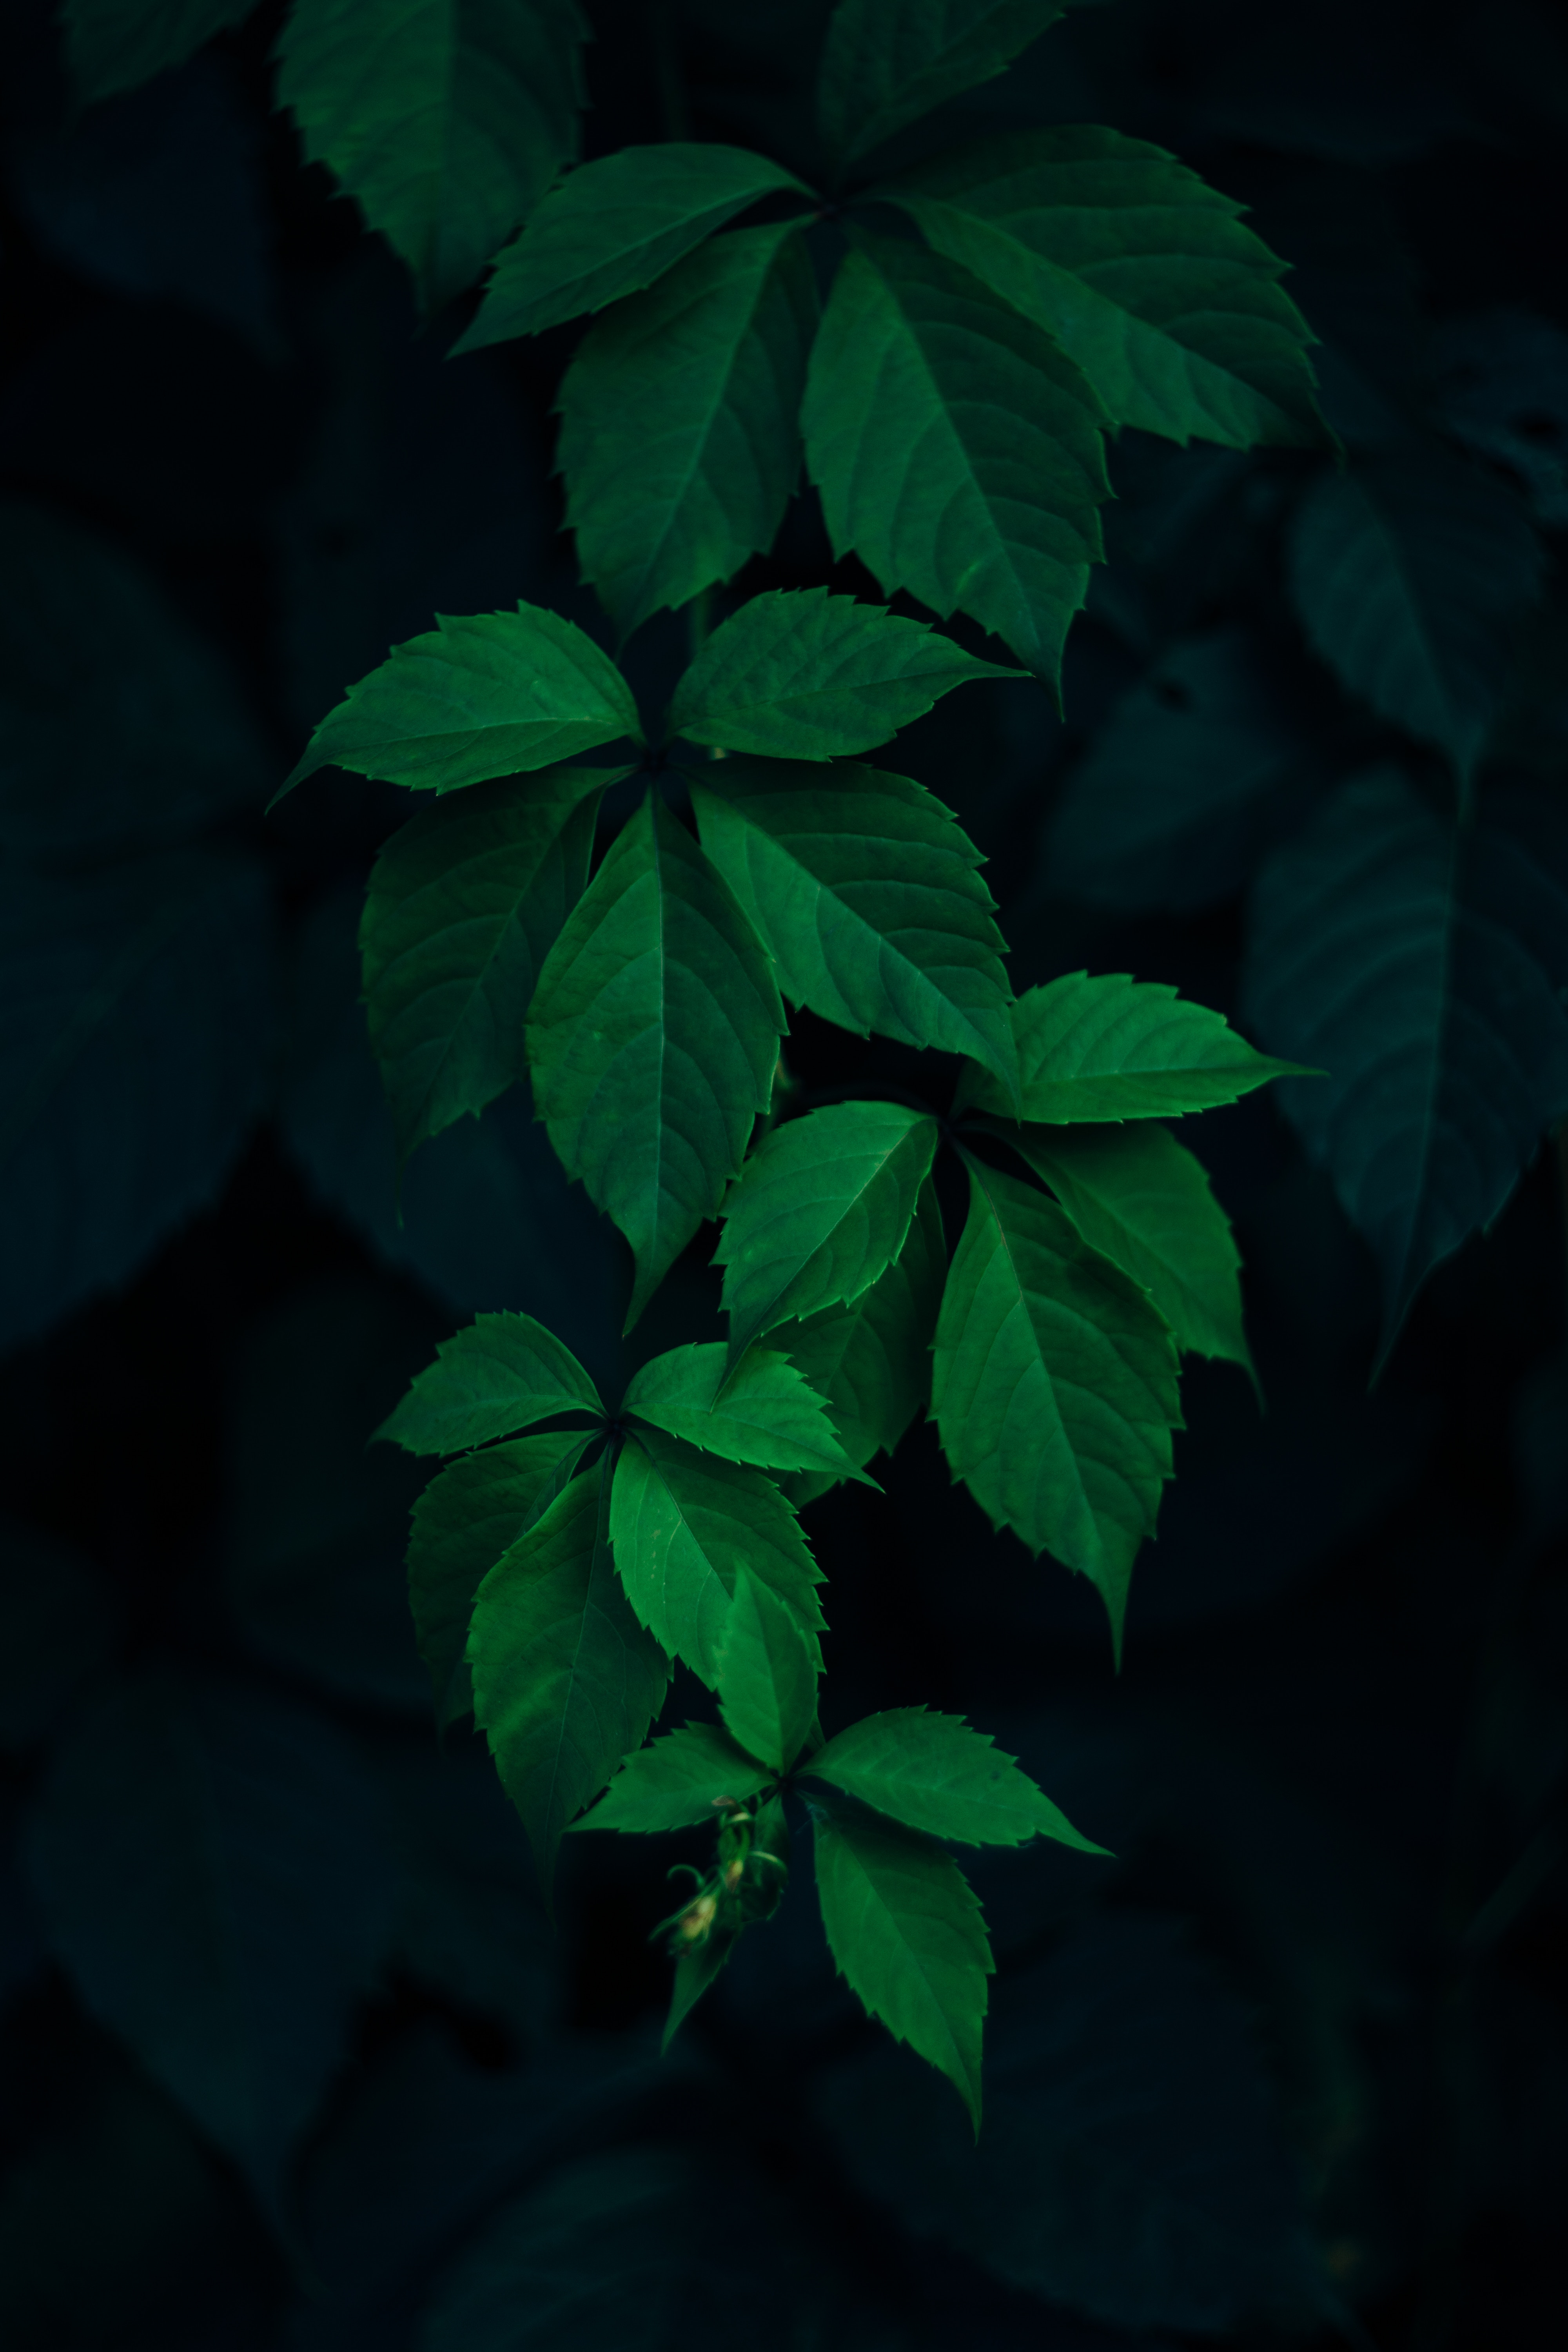 leaves, branches, green, dark background, nature wallpaper for mobile